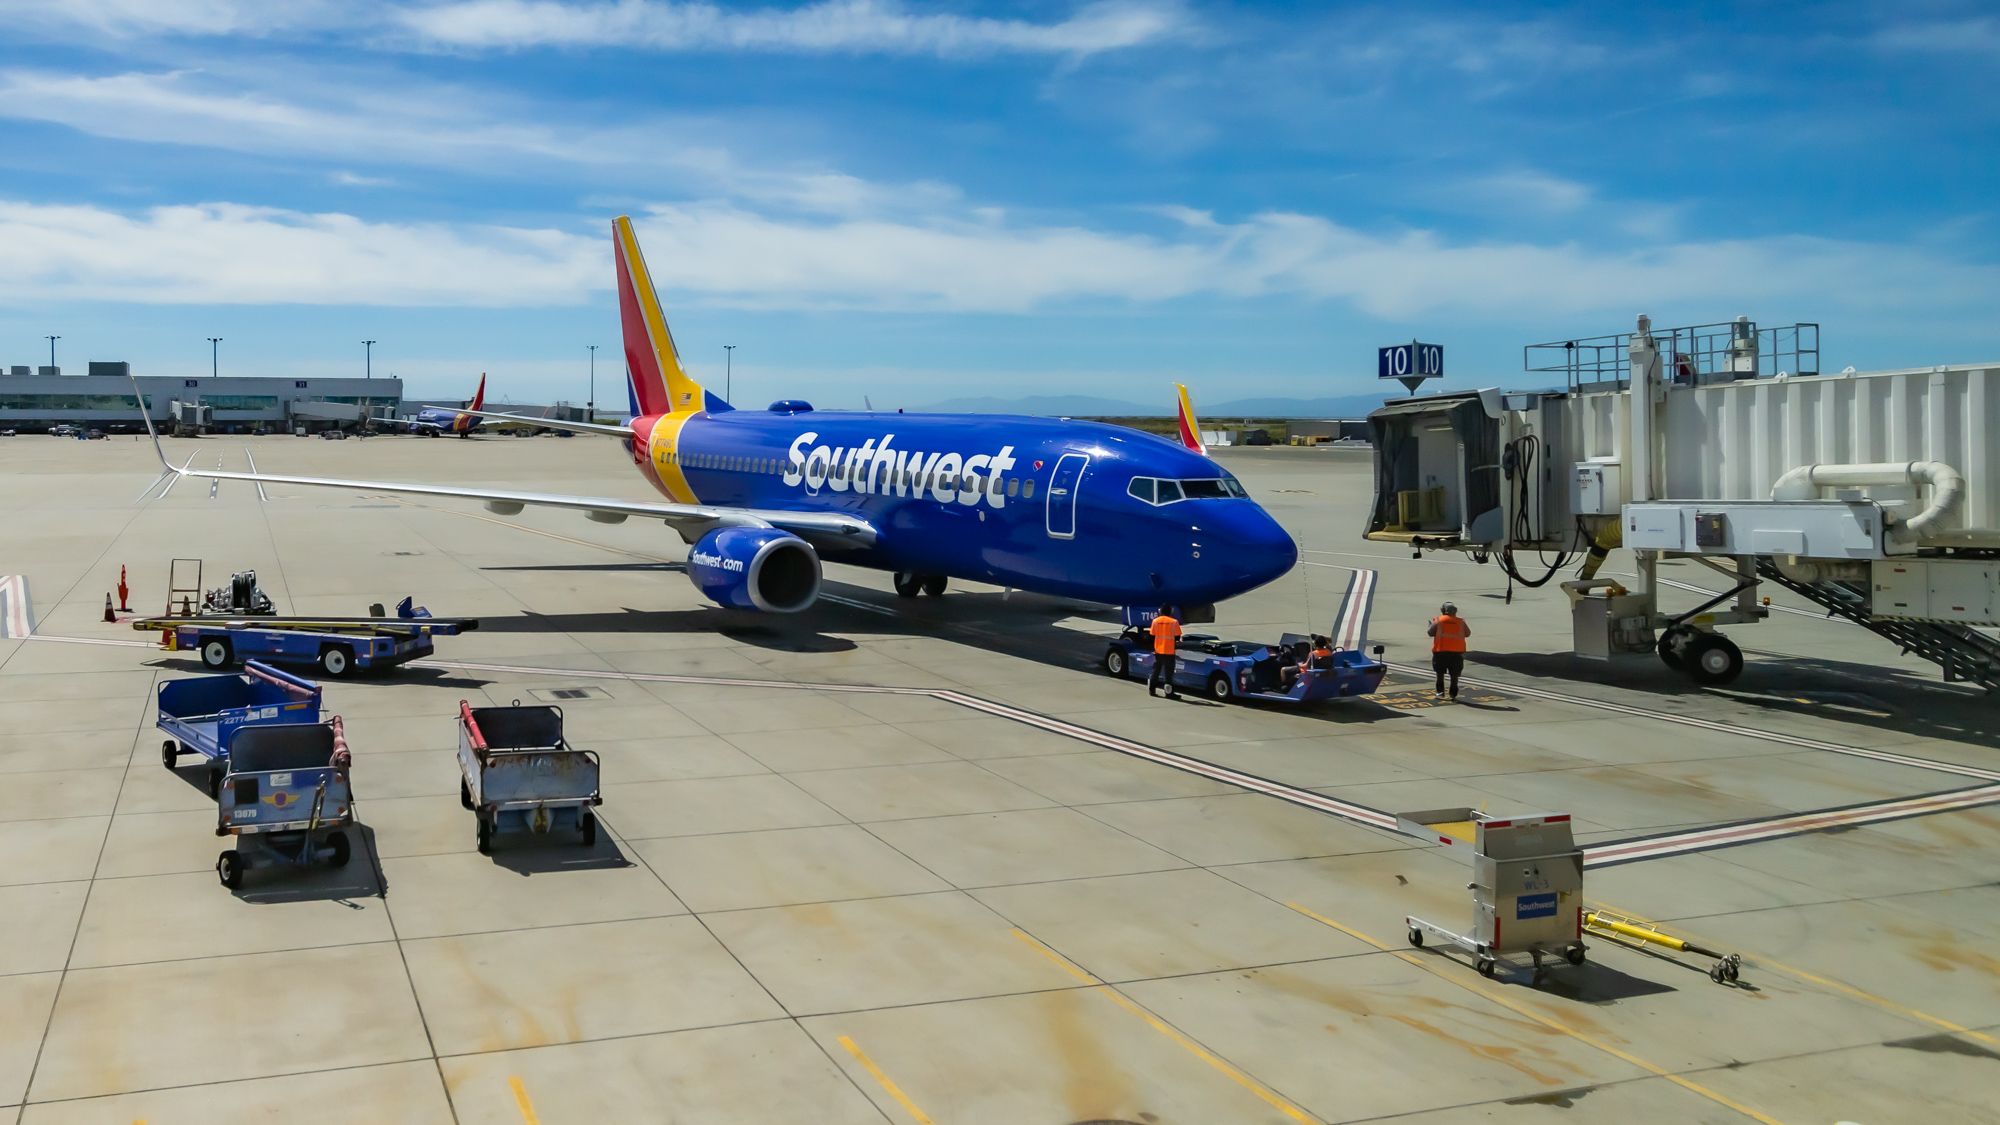 Southwest Airlines Boeing 737-7BD pushing back from Gate 10 at Oakland International Airport.